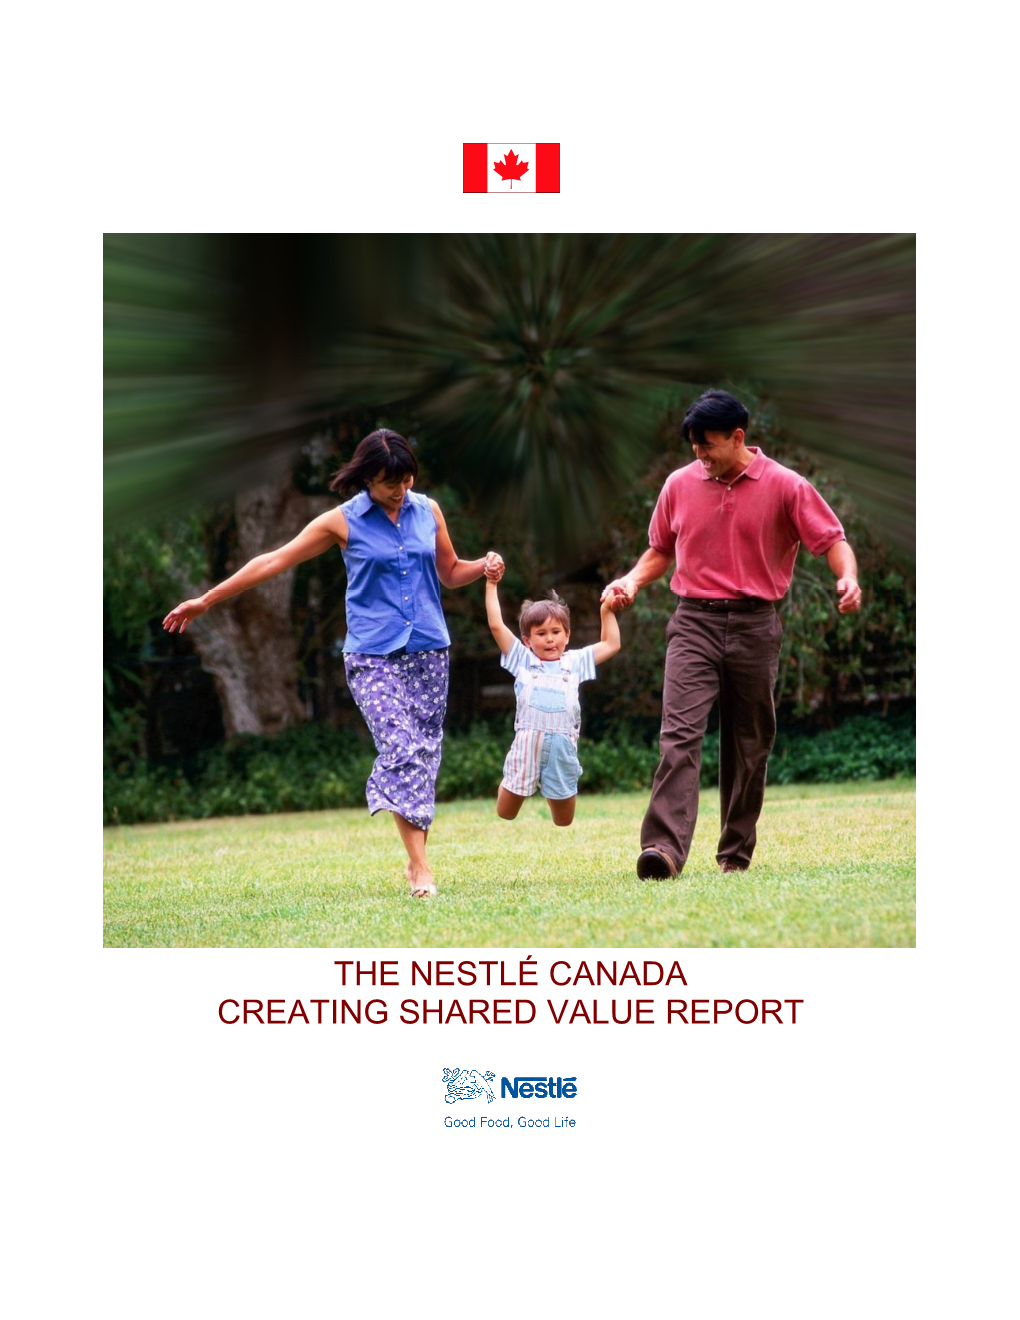 The Nestlé Canada Creating Shared Value Report Introduction